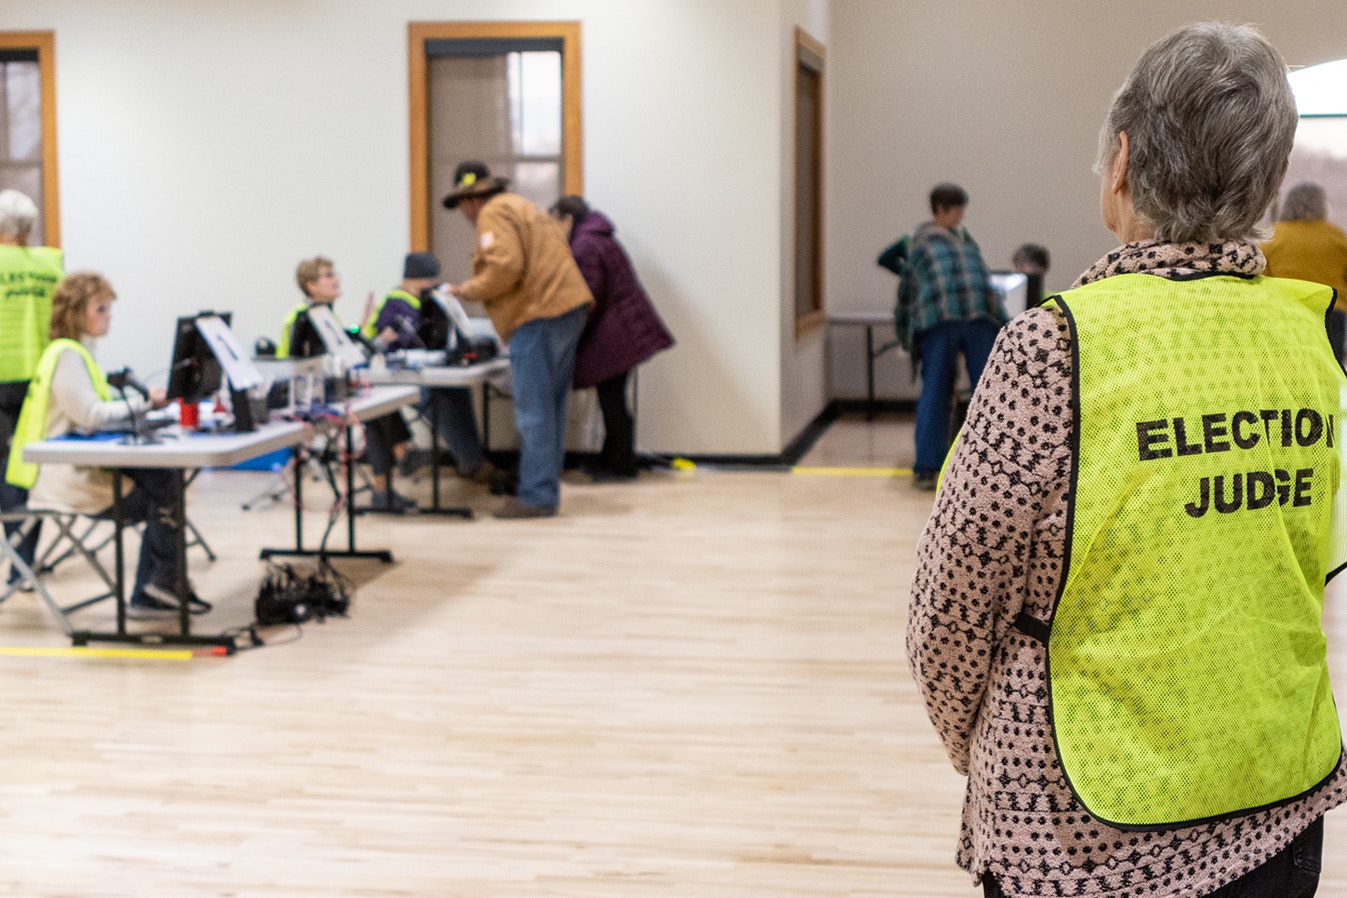 An election judge observes as voters sign in at a polling place in Cheyenne in November 2022.